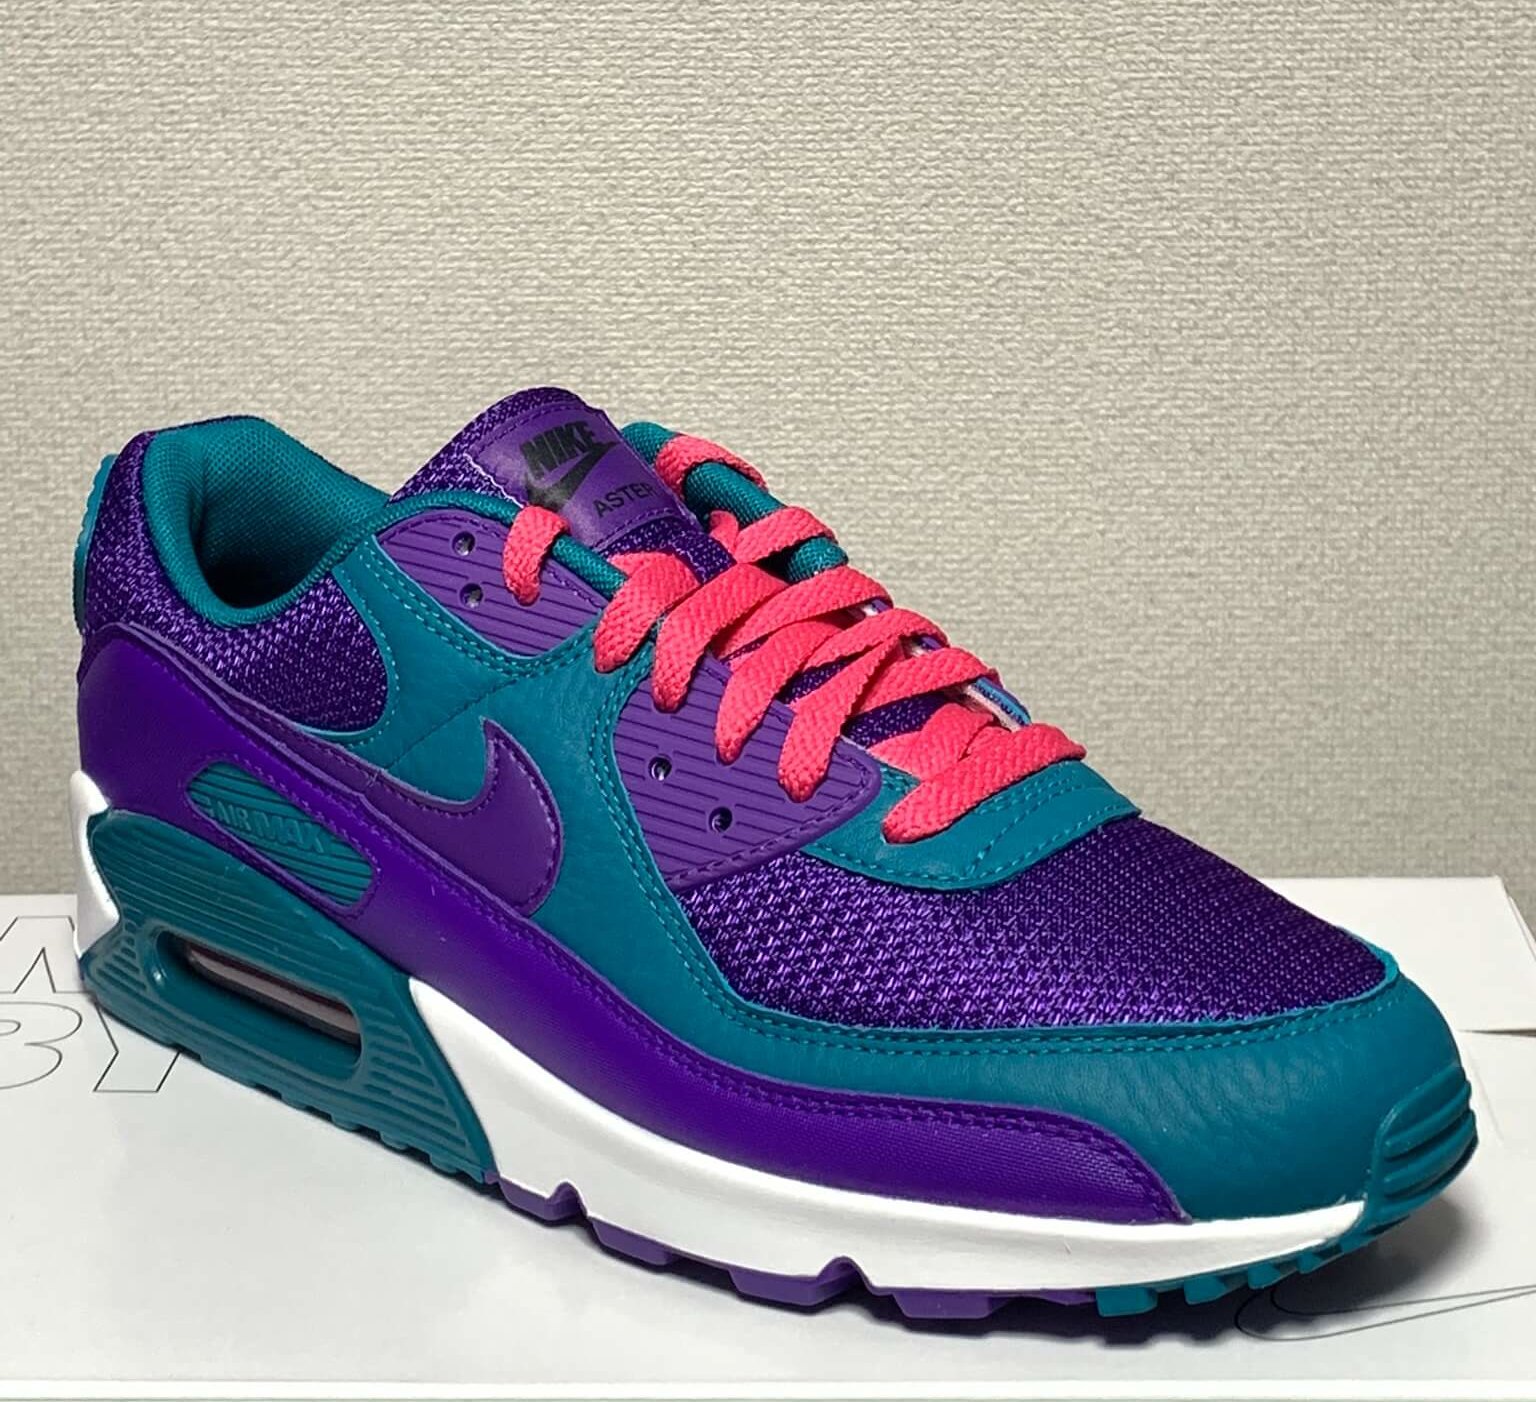 Nike Air Max 90 Performance Review - ASTERKICKS